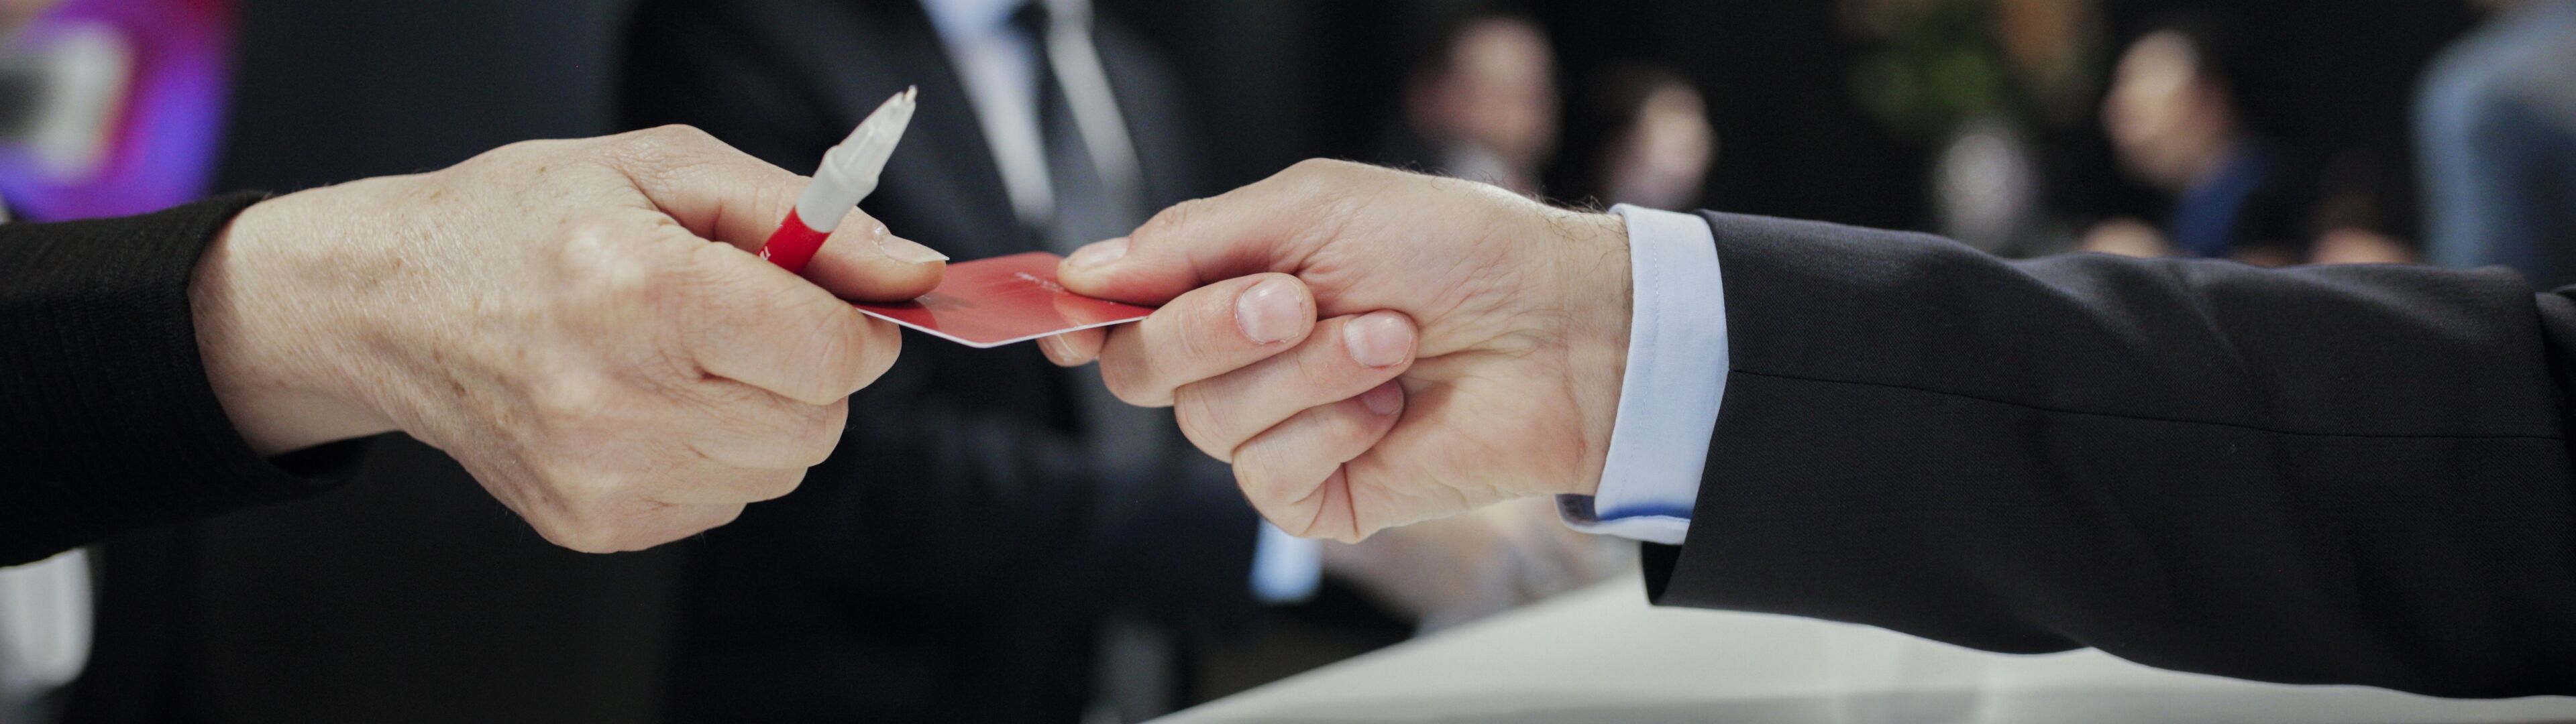 Two professionals exchanging business cards in a blurred conference room setting, signifying a formal introduction or partnership.